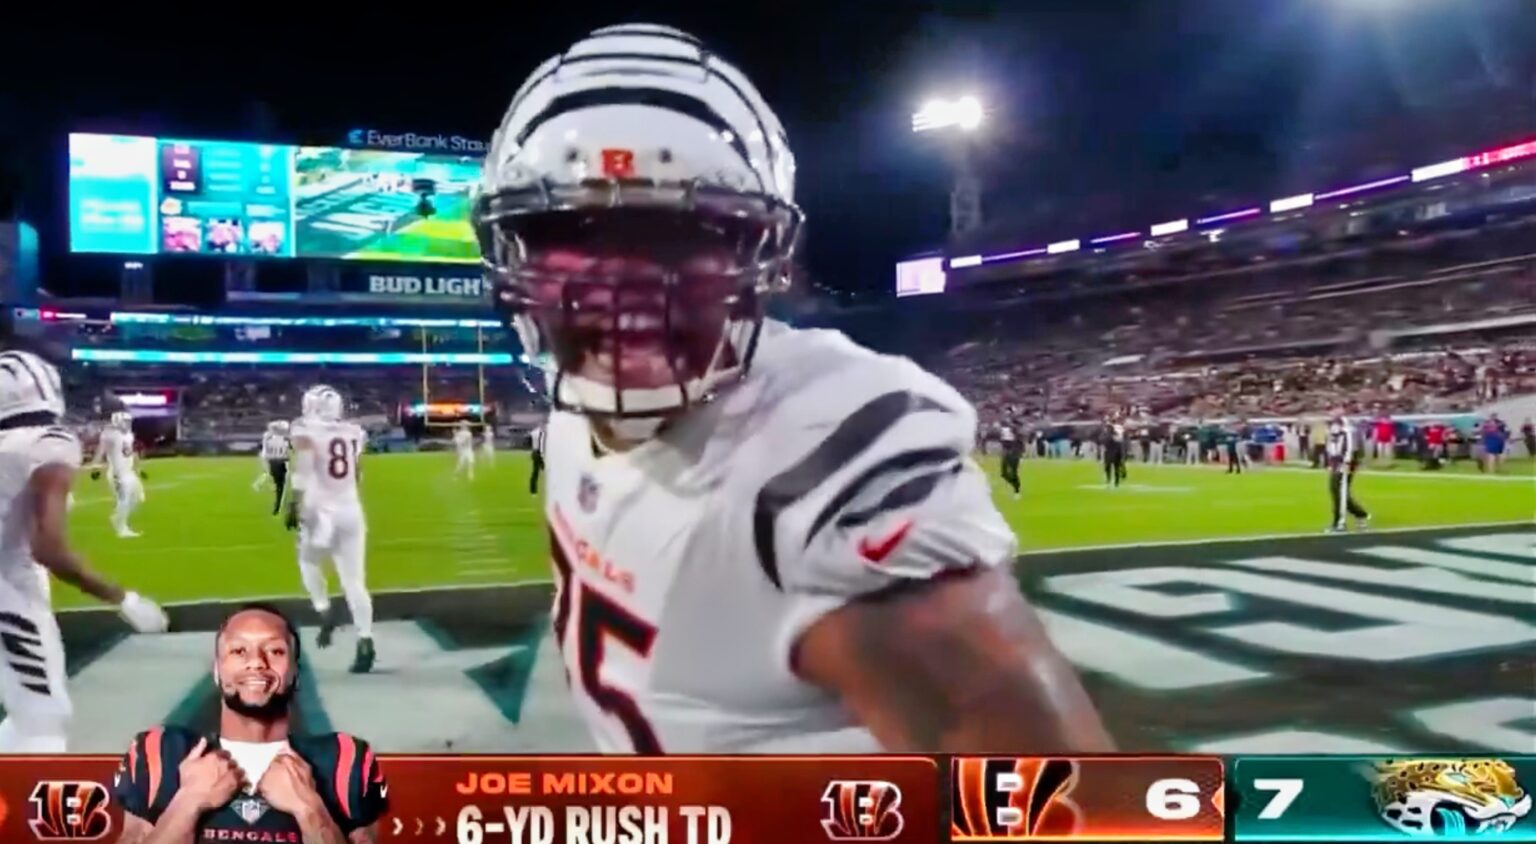 During the TD Celebration on MNF, a Bengals Player Screams Offensive Words Into the Camera for the Entire Country to Hear (VIDEO)